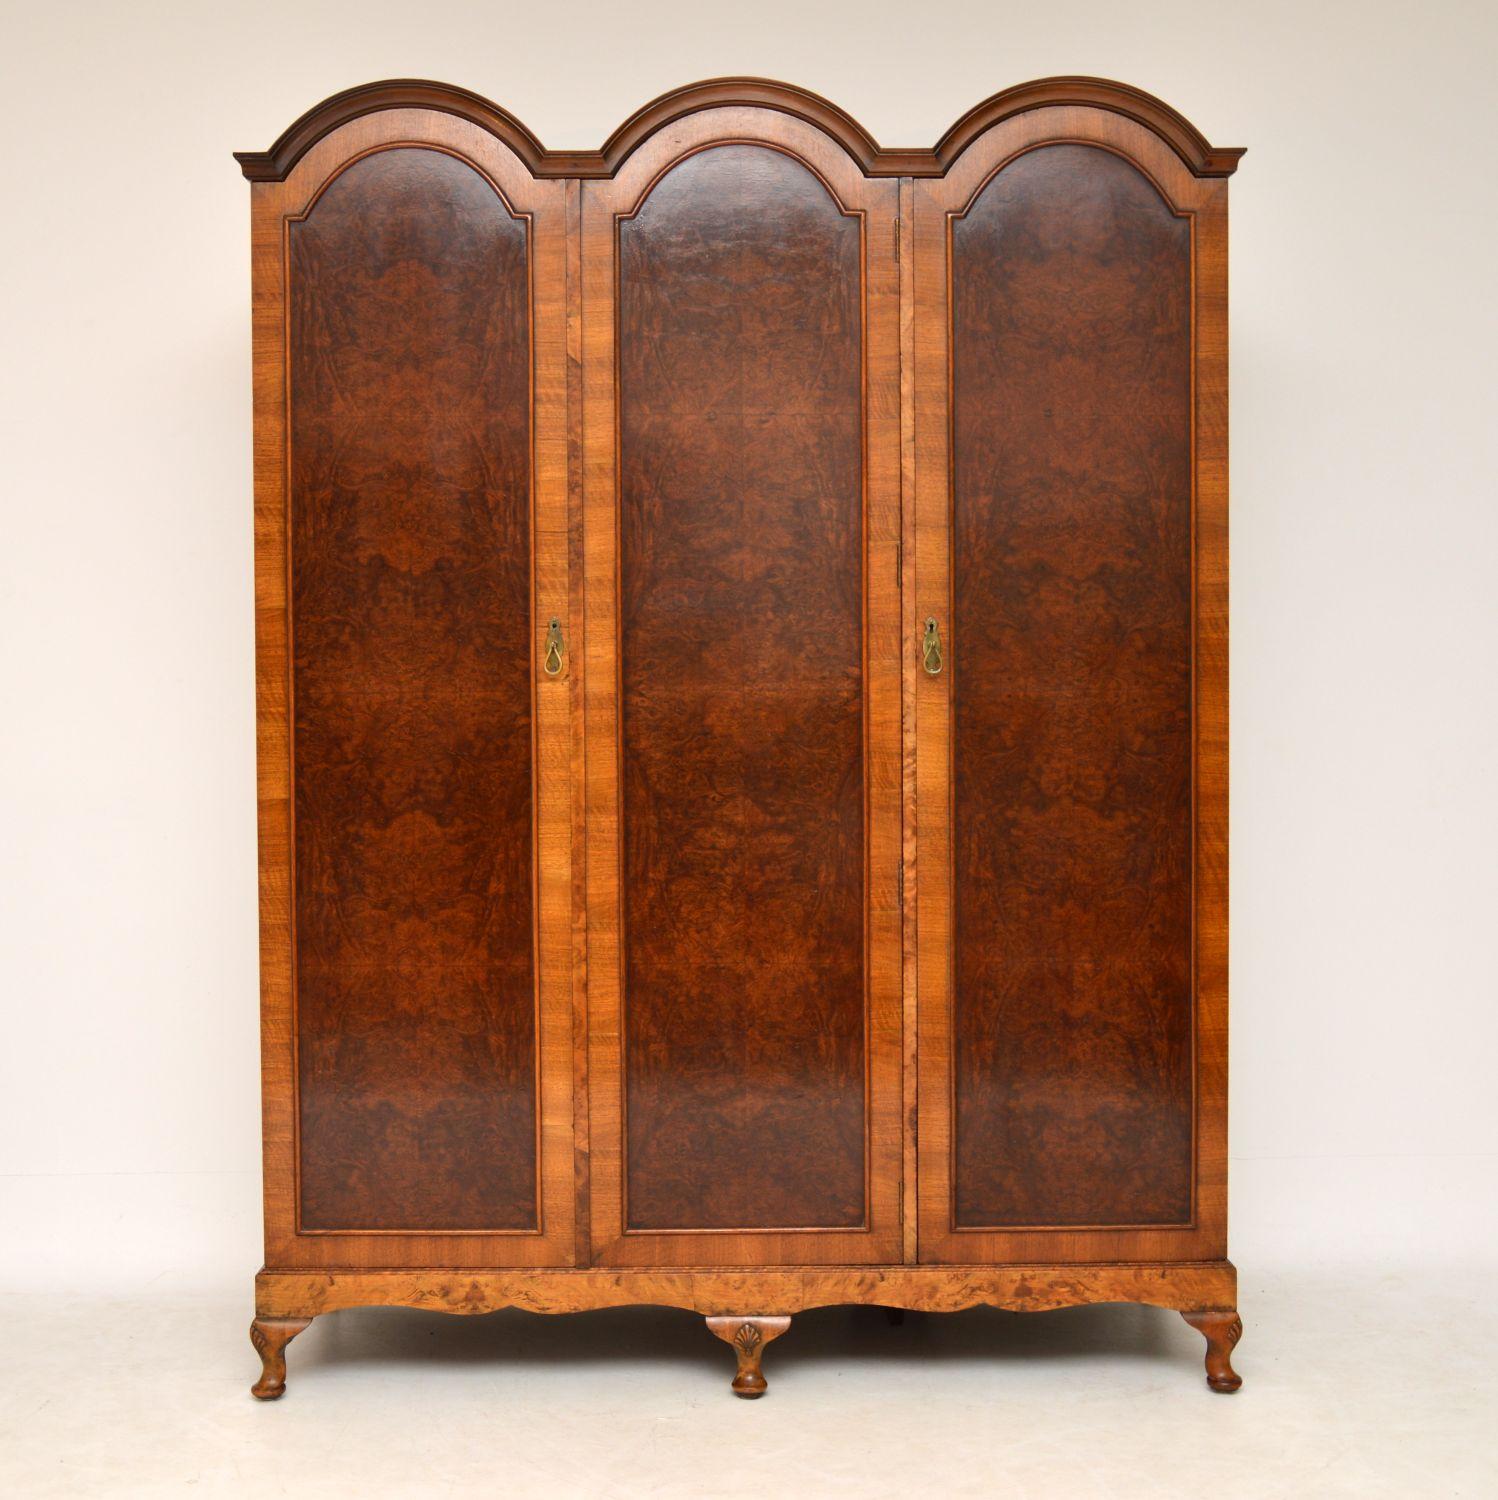 Very impressive antique burr walnut triple arched three door wardrobe in excellent condition, having just been French polished. It’s a very practicable piece of furniture with everything you could need inside. There’s a double hanging space with a